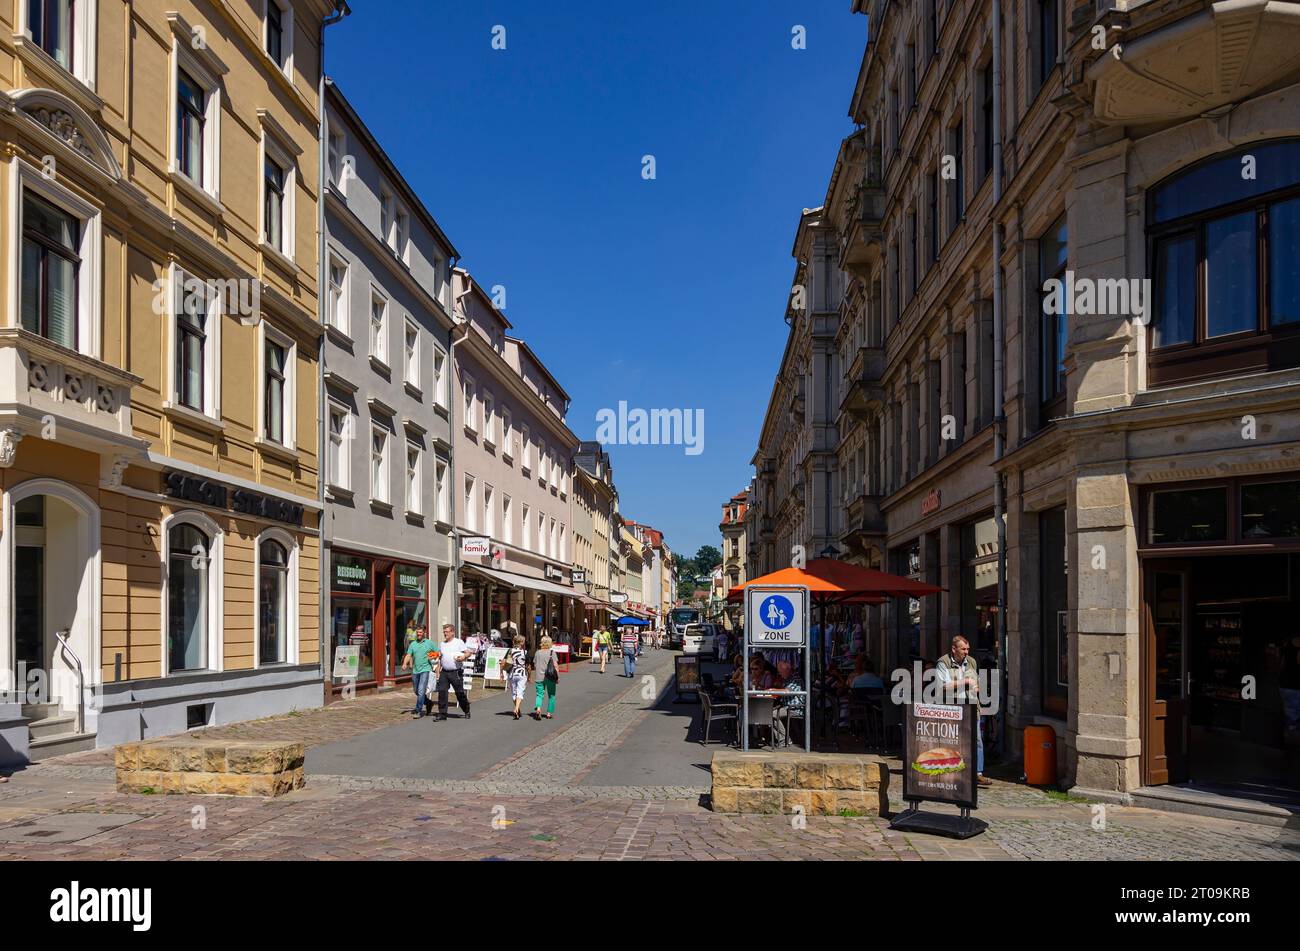 Lively street scene, historic Old Town of Pirna, Saxon Switzerland, Saxony, Germany, August 24, 2016, for editorial use only. Stock Photo